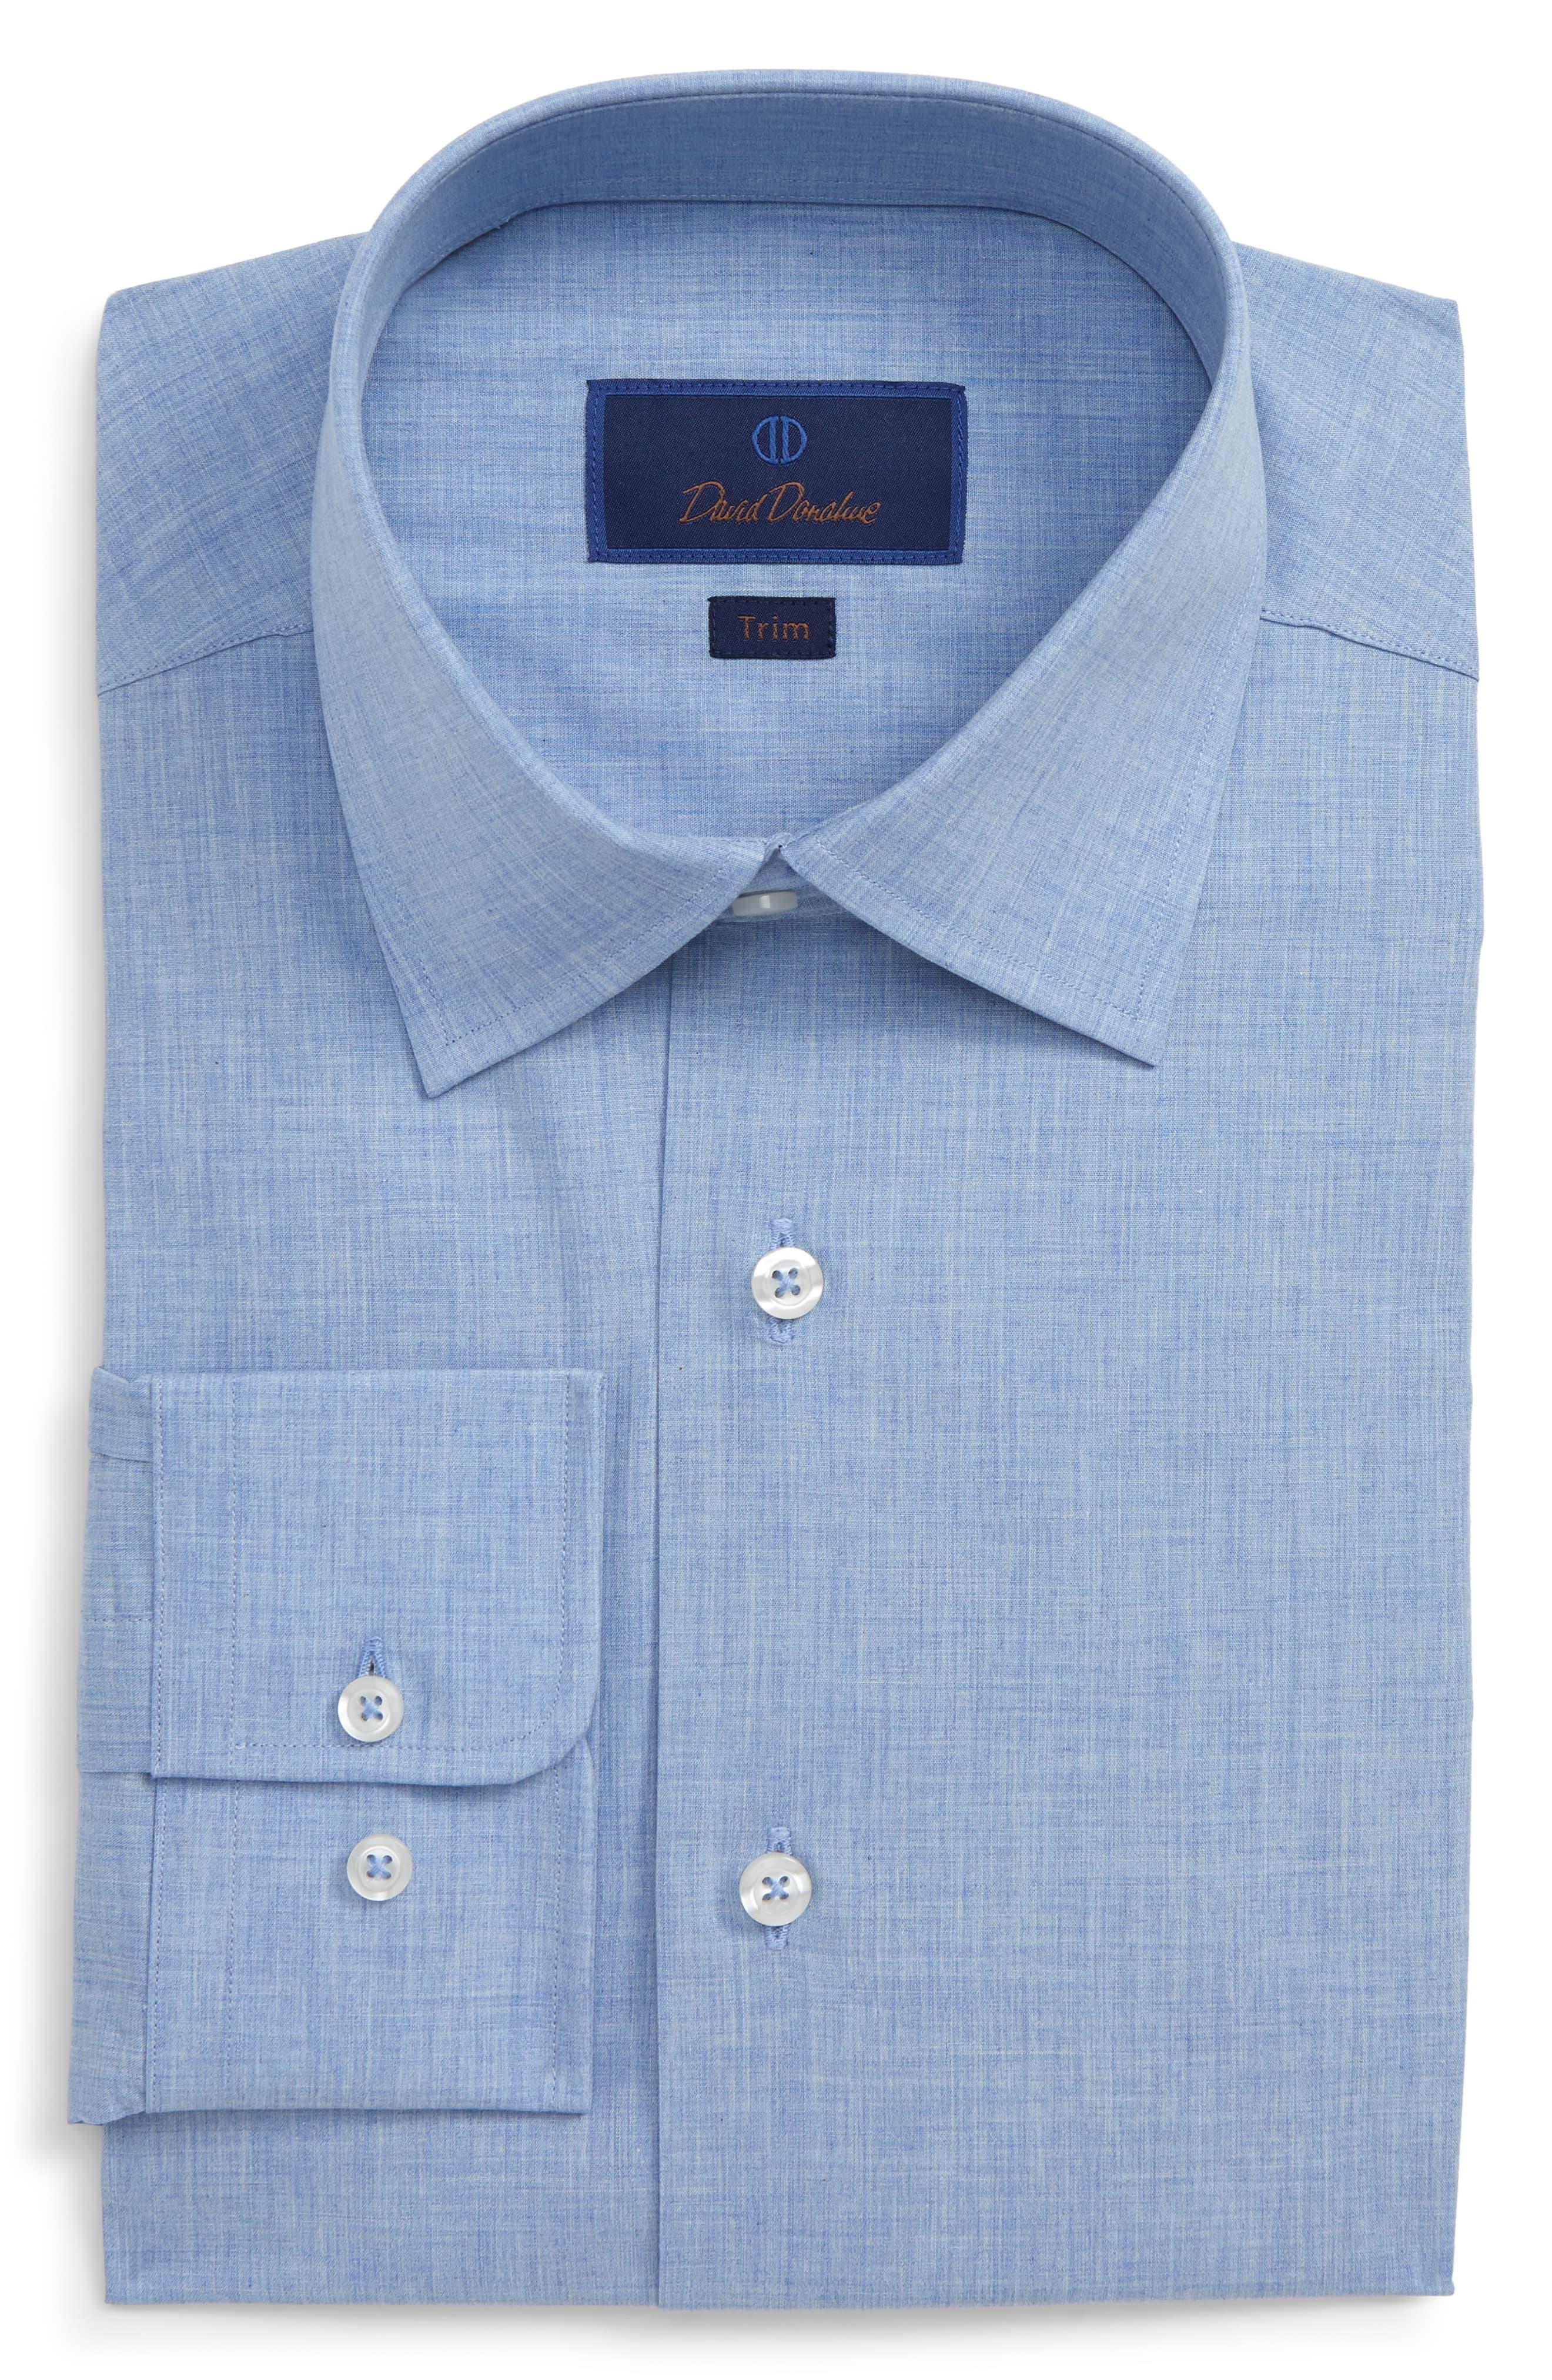 David Donahue Trim Fit Solid Dress Shirt in Blue for Men - Lyst